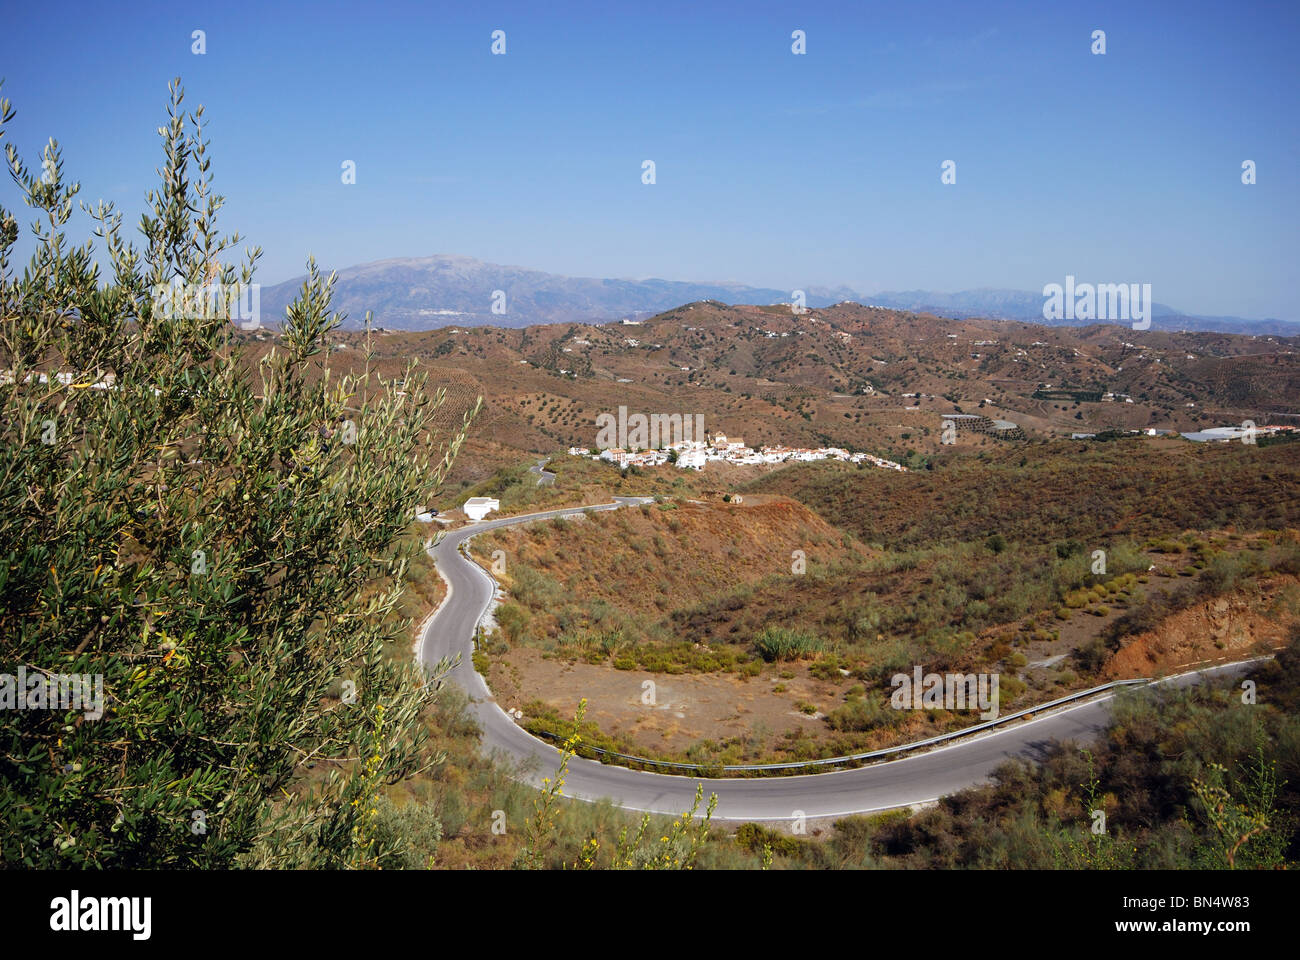 View of the countryside, Macharaviaya, Costa del Sol, Malaga Province, Andalucia, Spain, Western Europe. Stock Photo